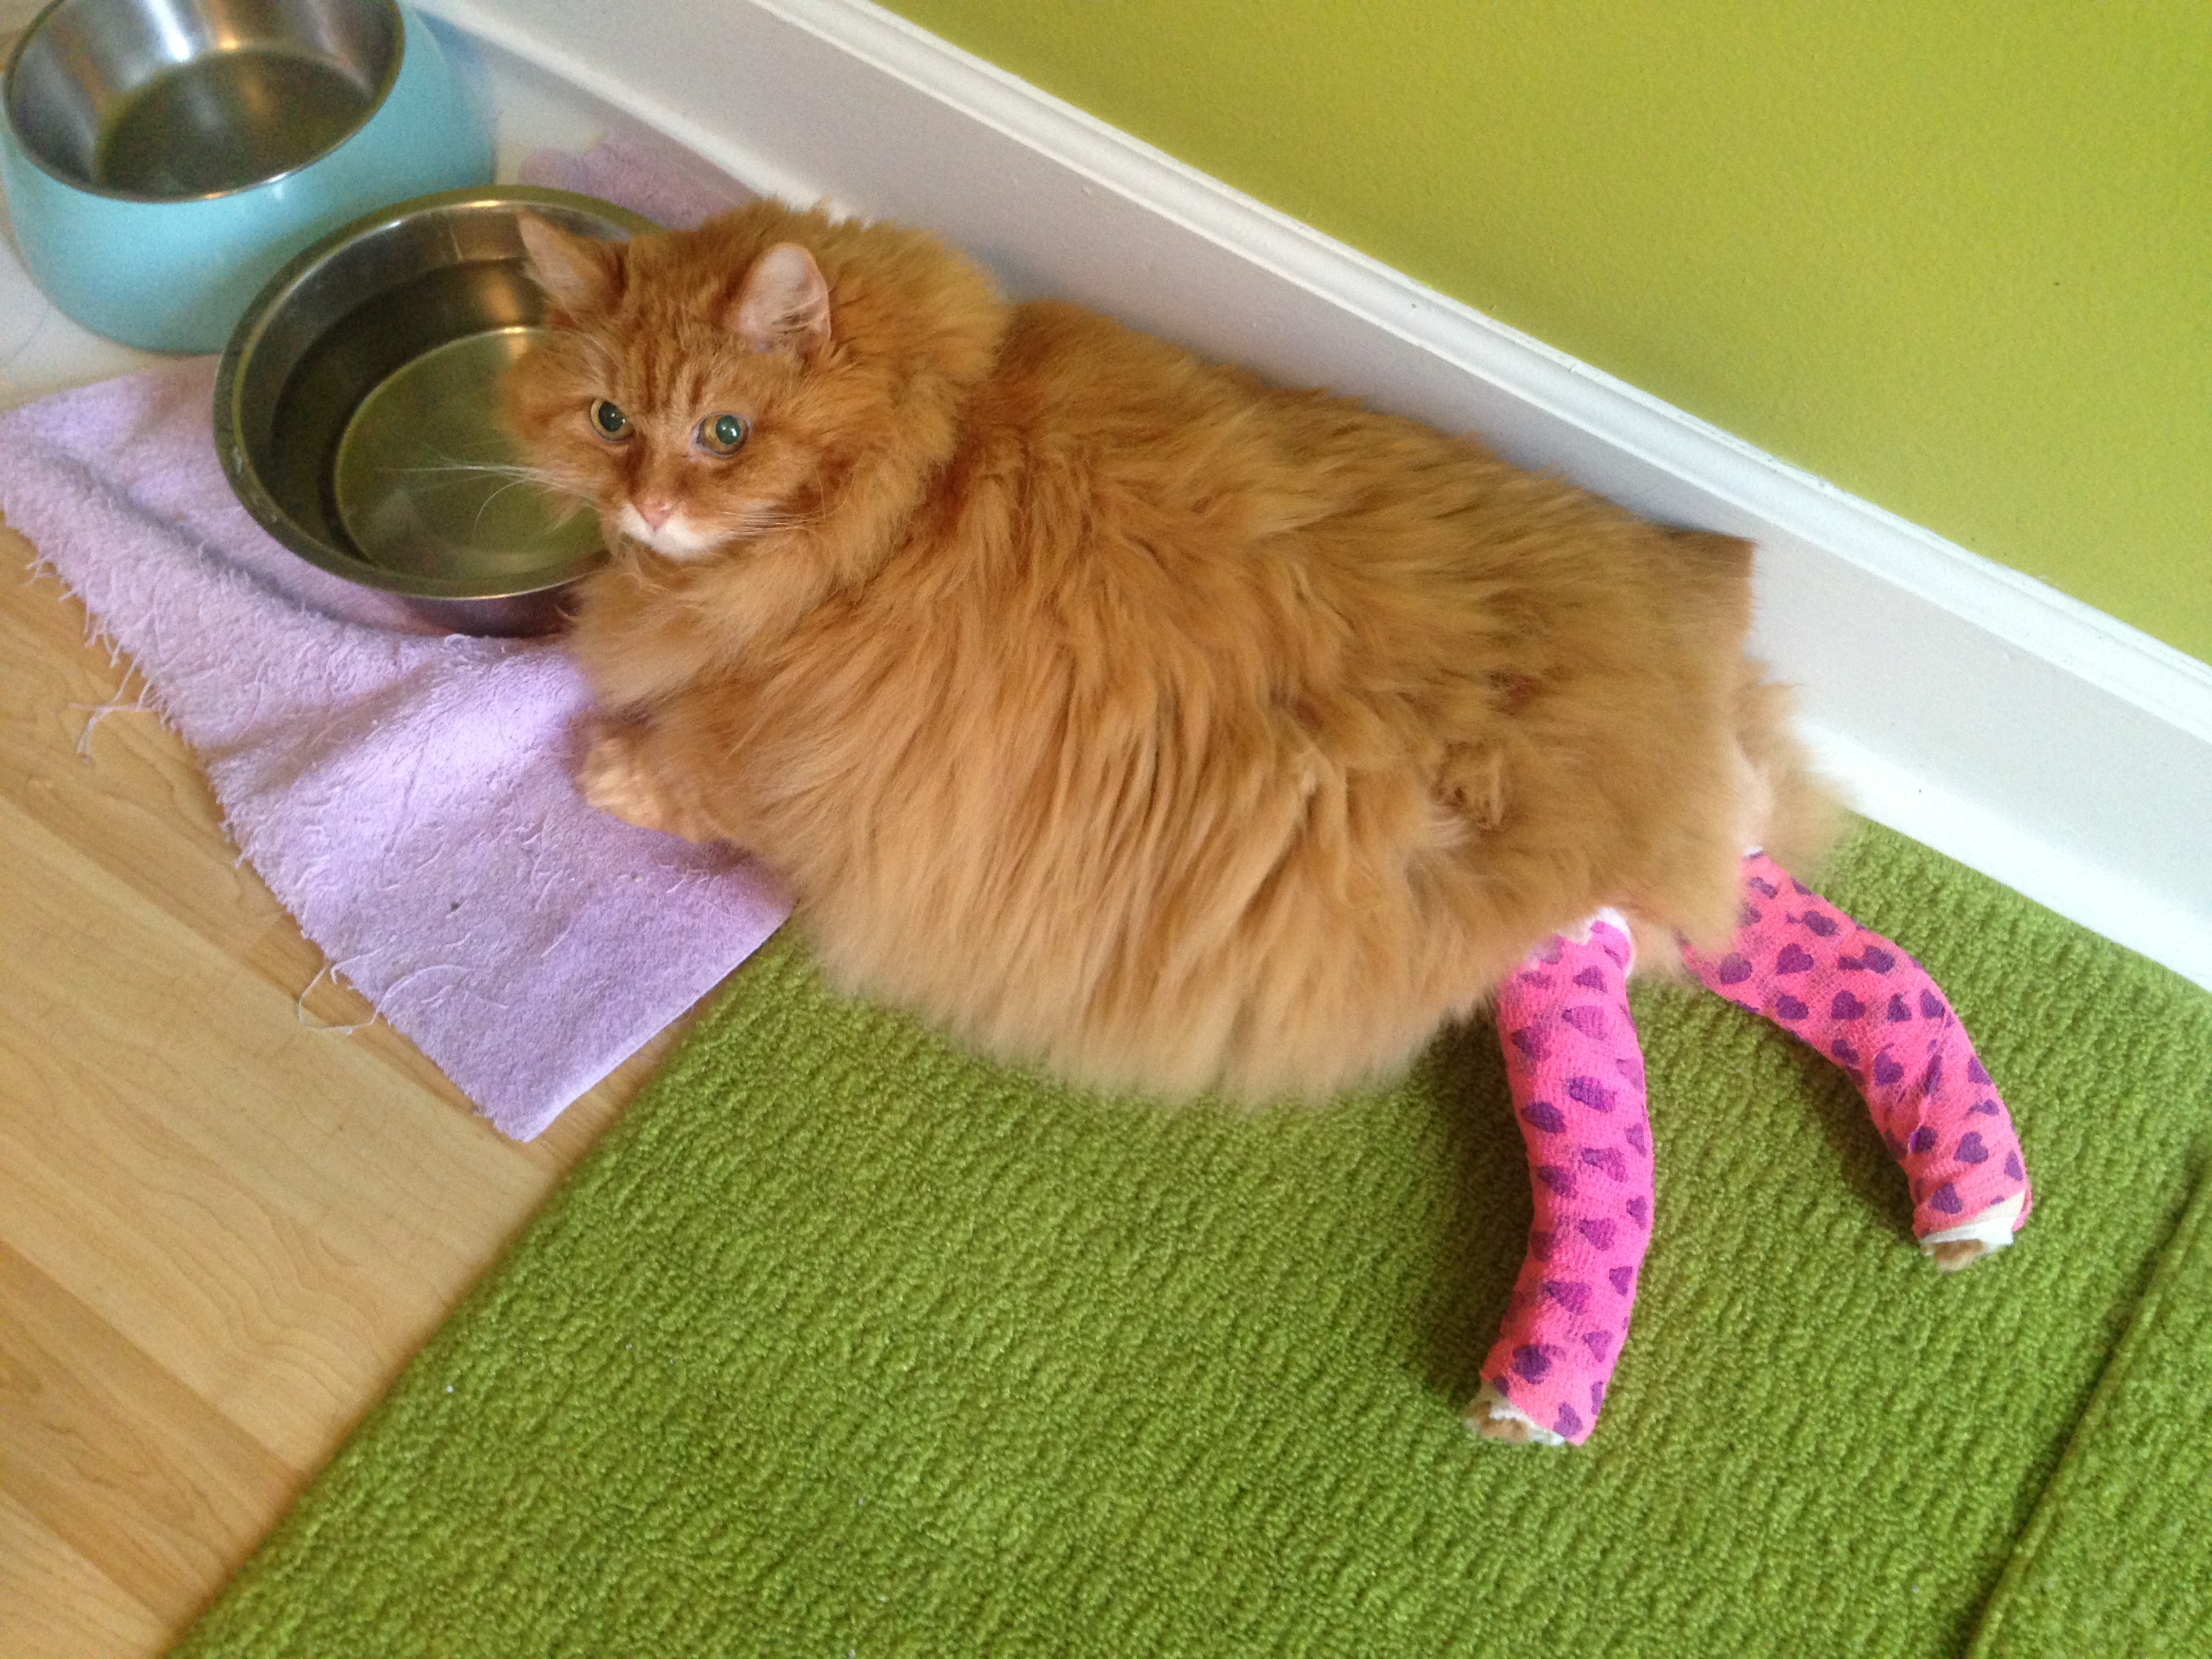 How to Splint a Cat Leg Things You Should Take Care of